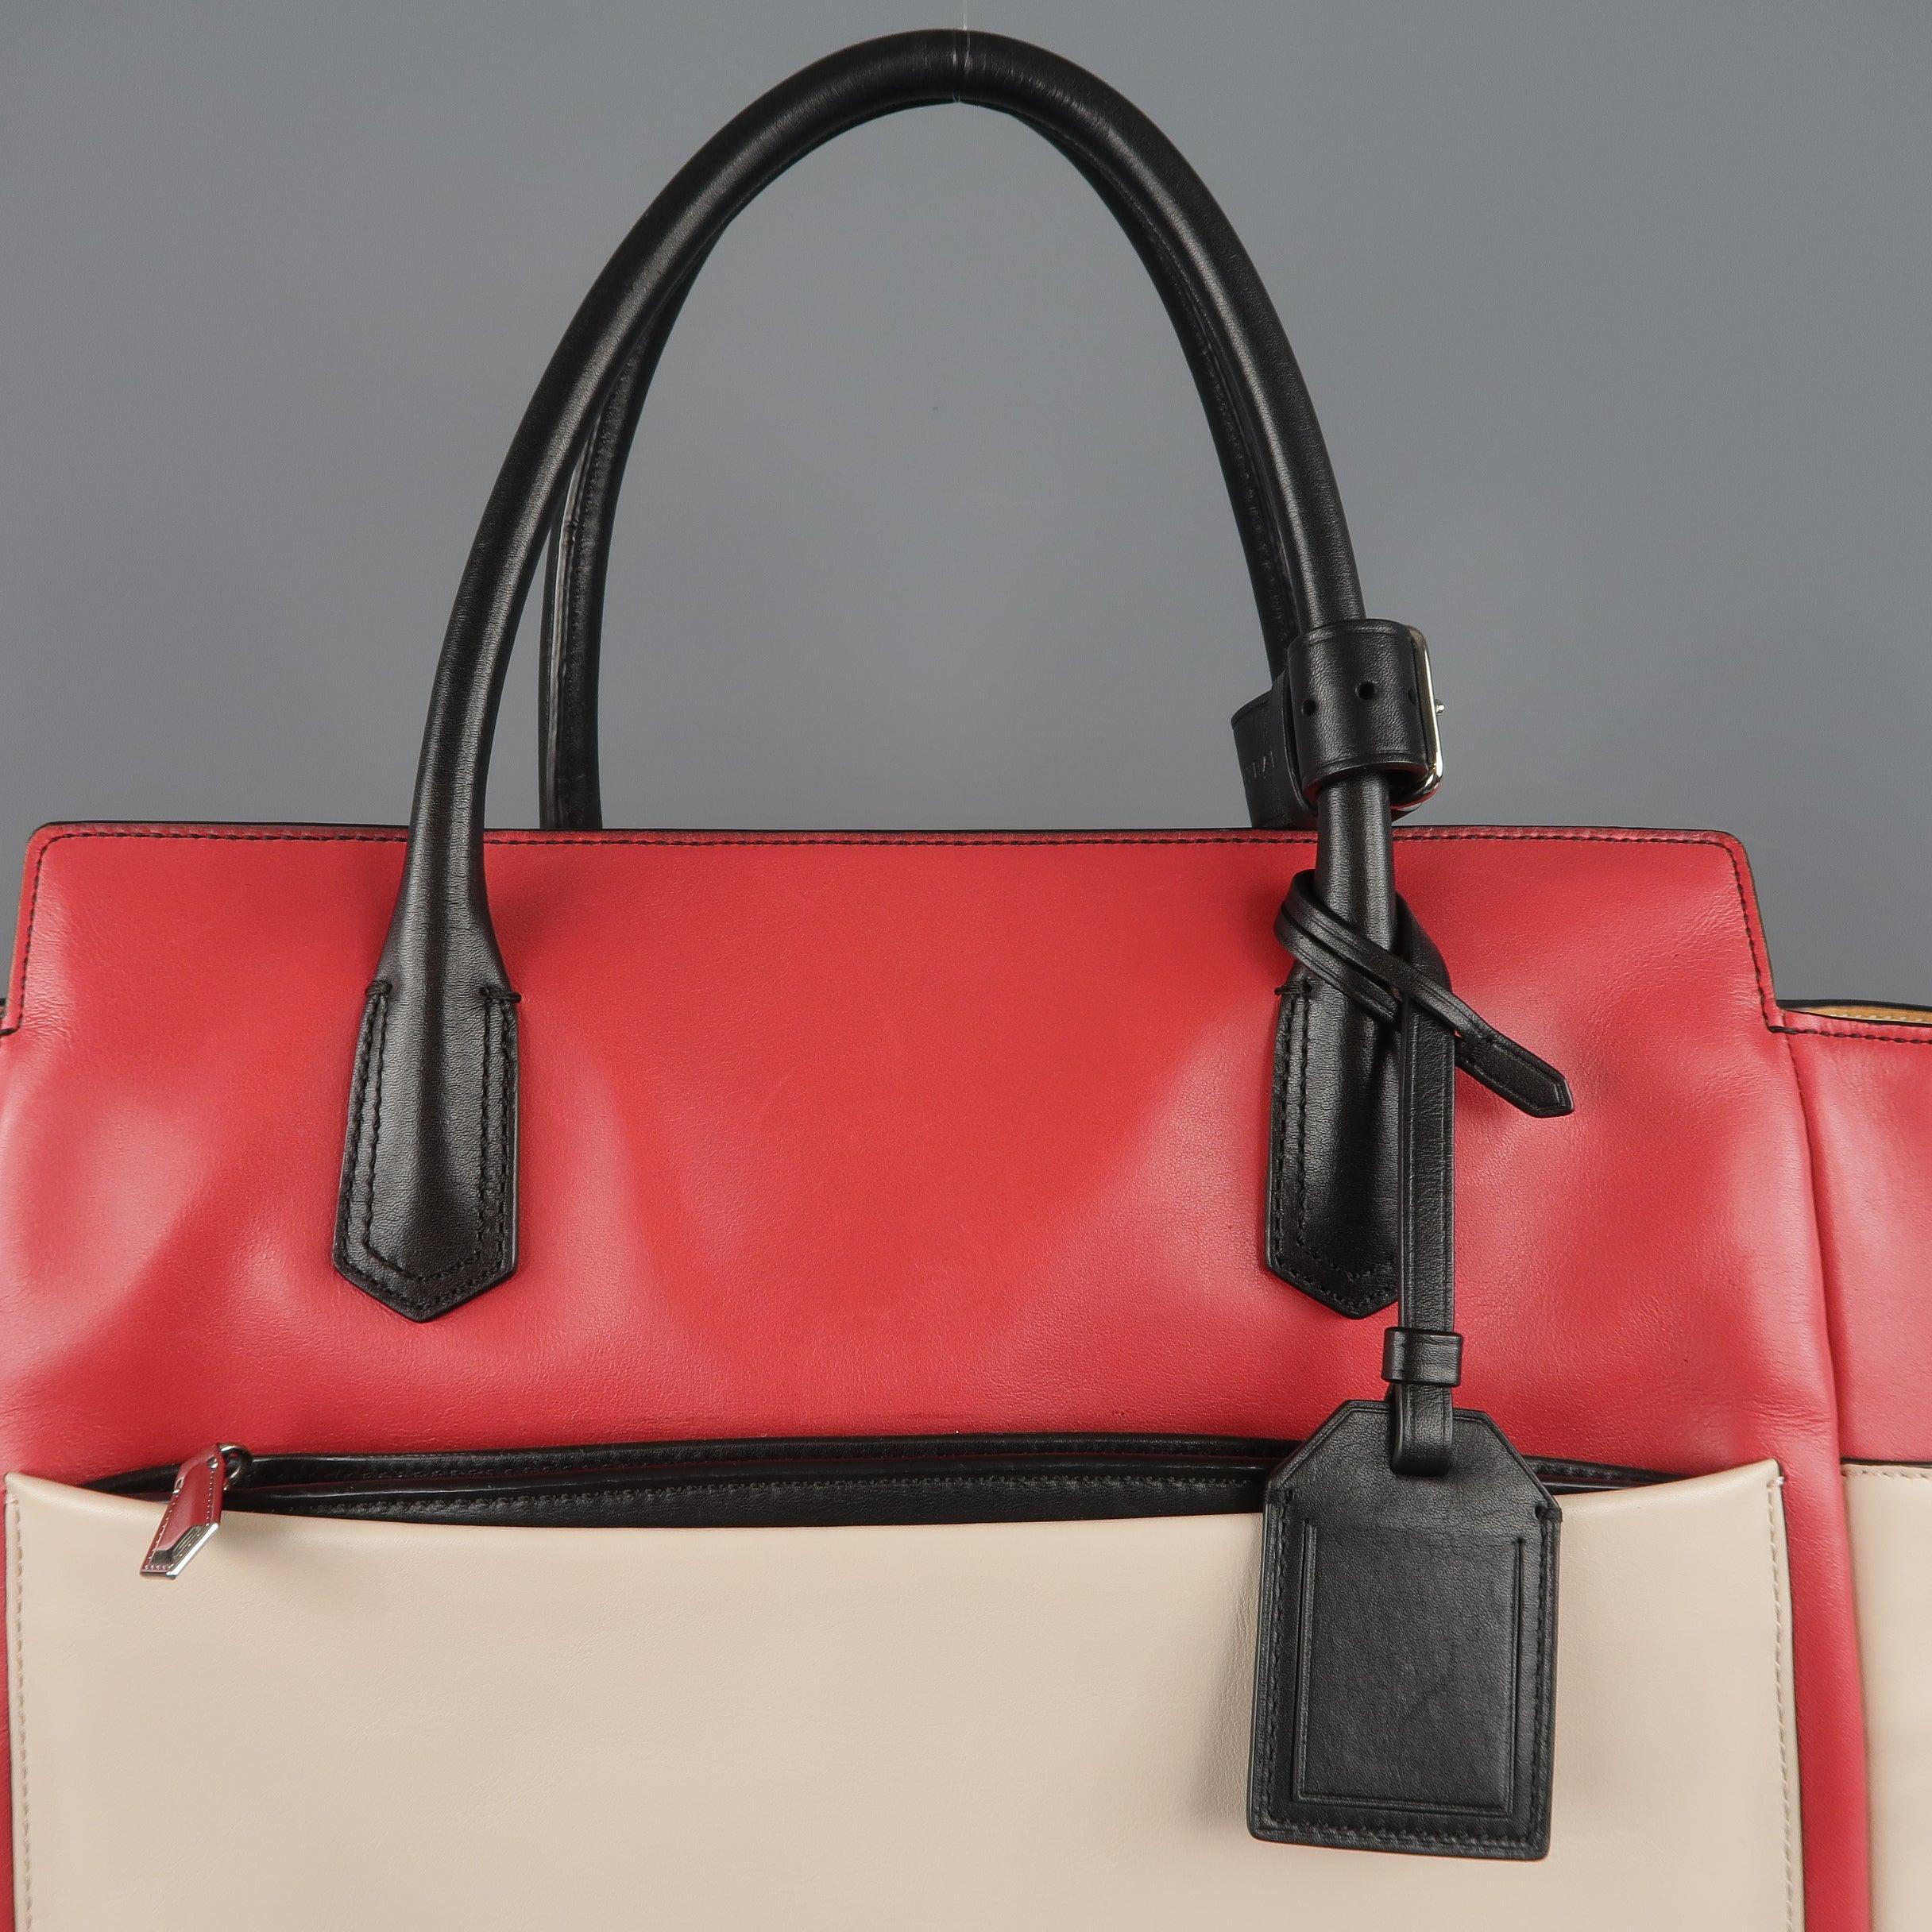 REED KRAKOFF tote bag comes in light pink leather with a light red top panel, black covered double top handles and piping, multi-pocket sides and back, and canvas interior. Wear throughout. Good Pre-Owned Condition. 

Measurements: 
  Length: 17